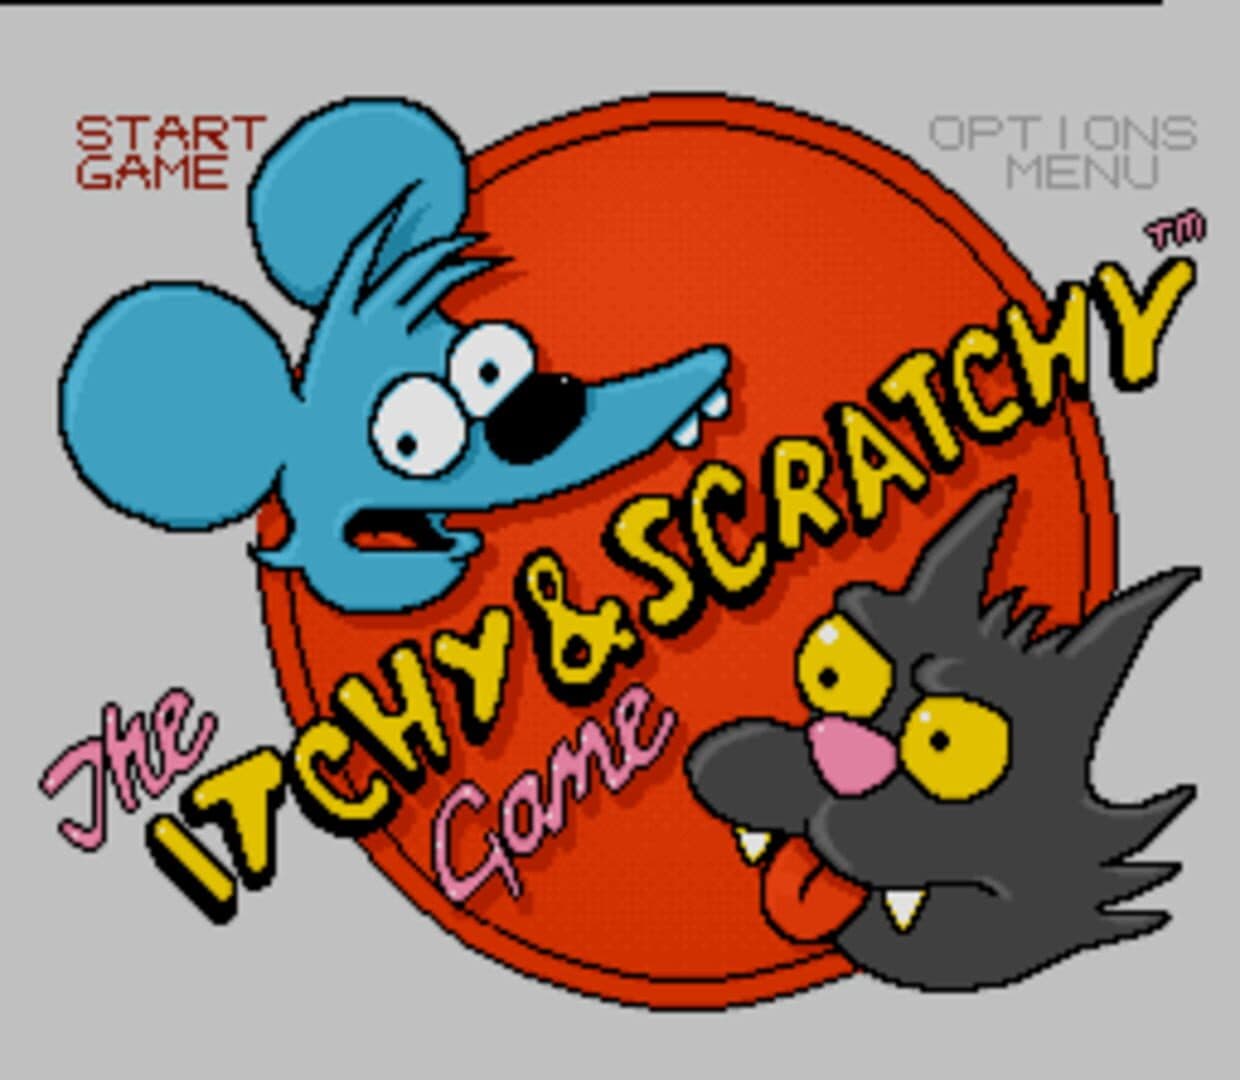 The Itchy & Scratchy Game Image